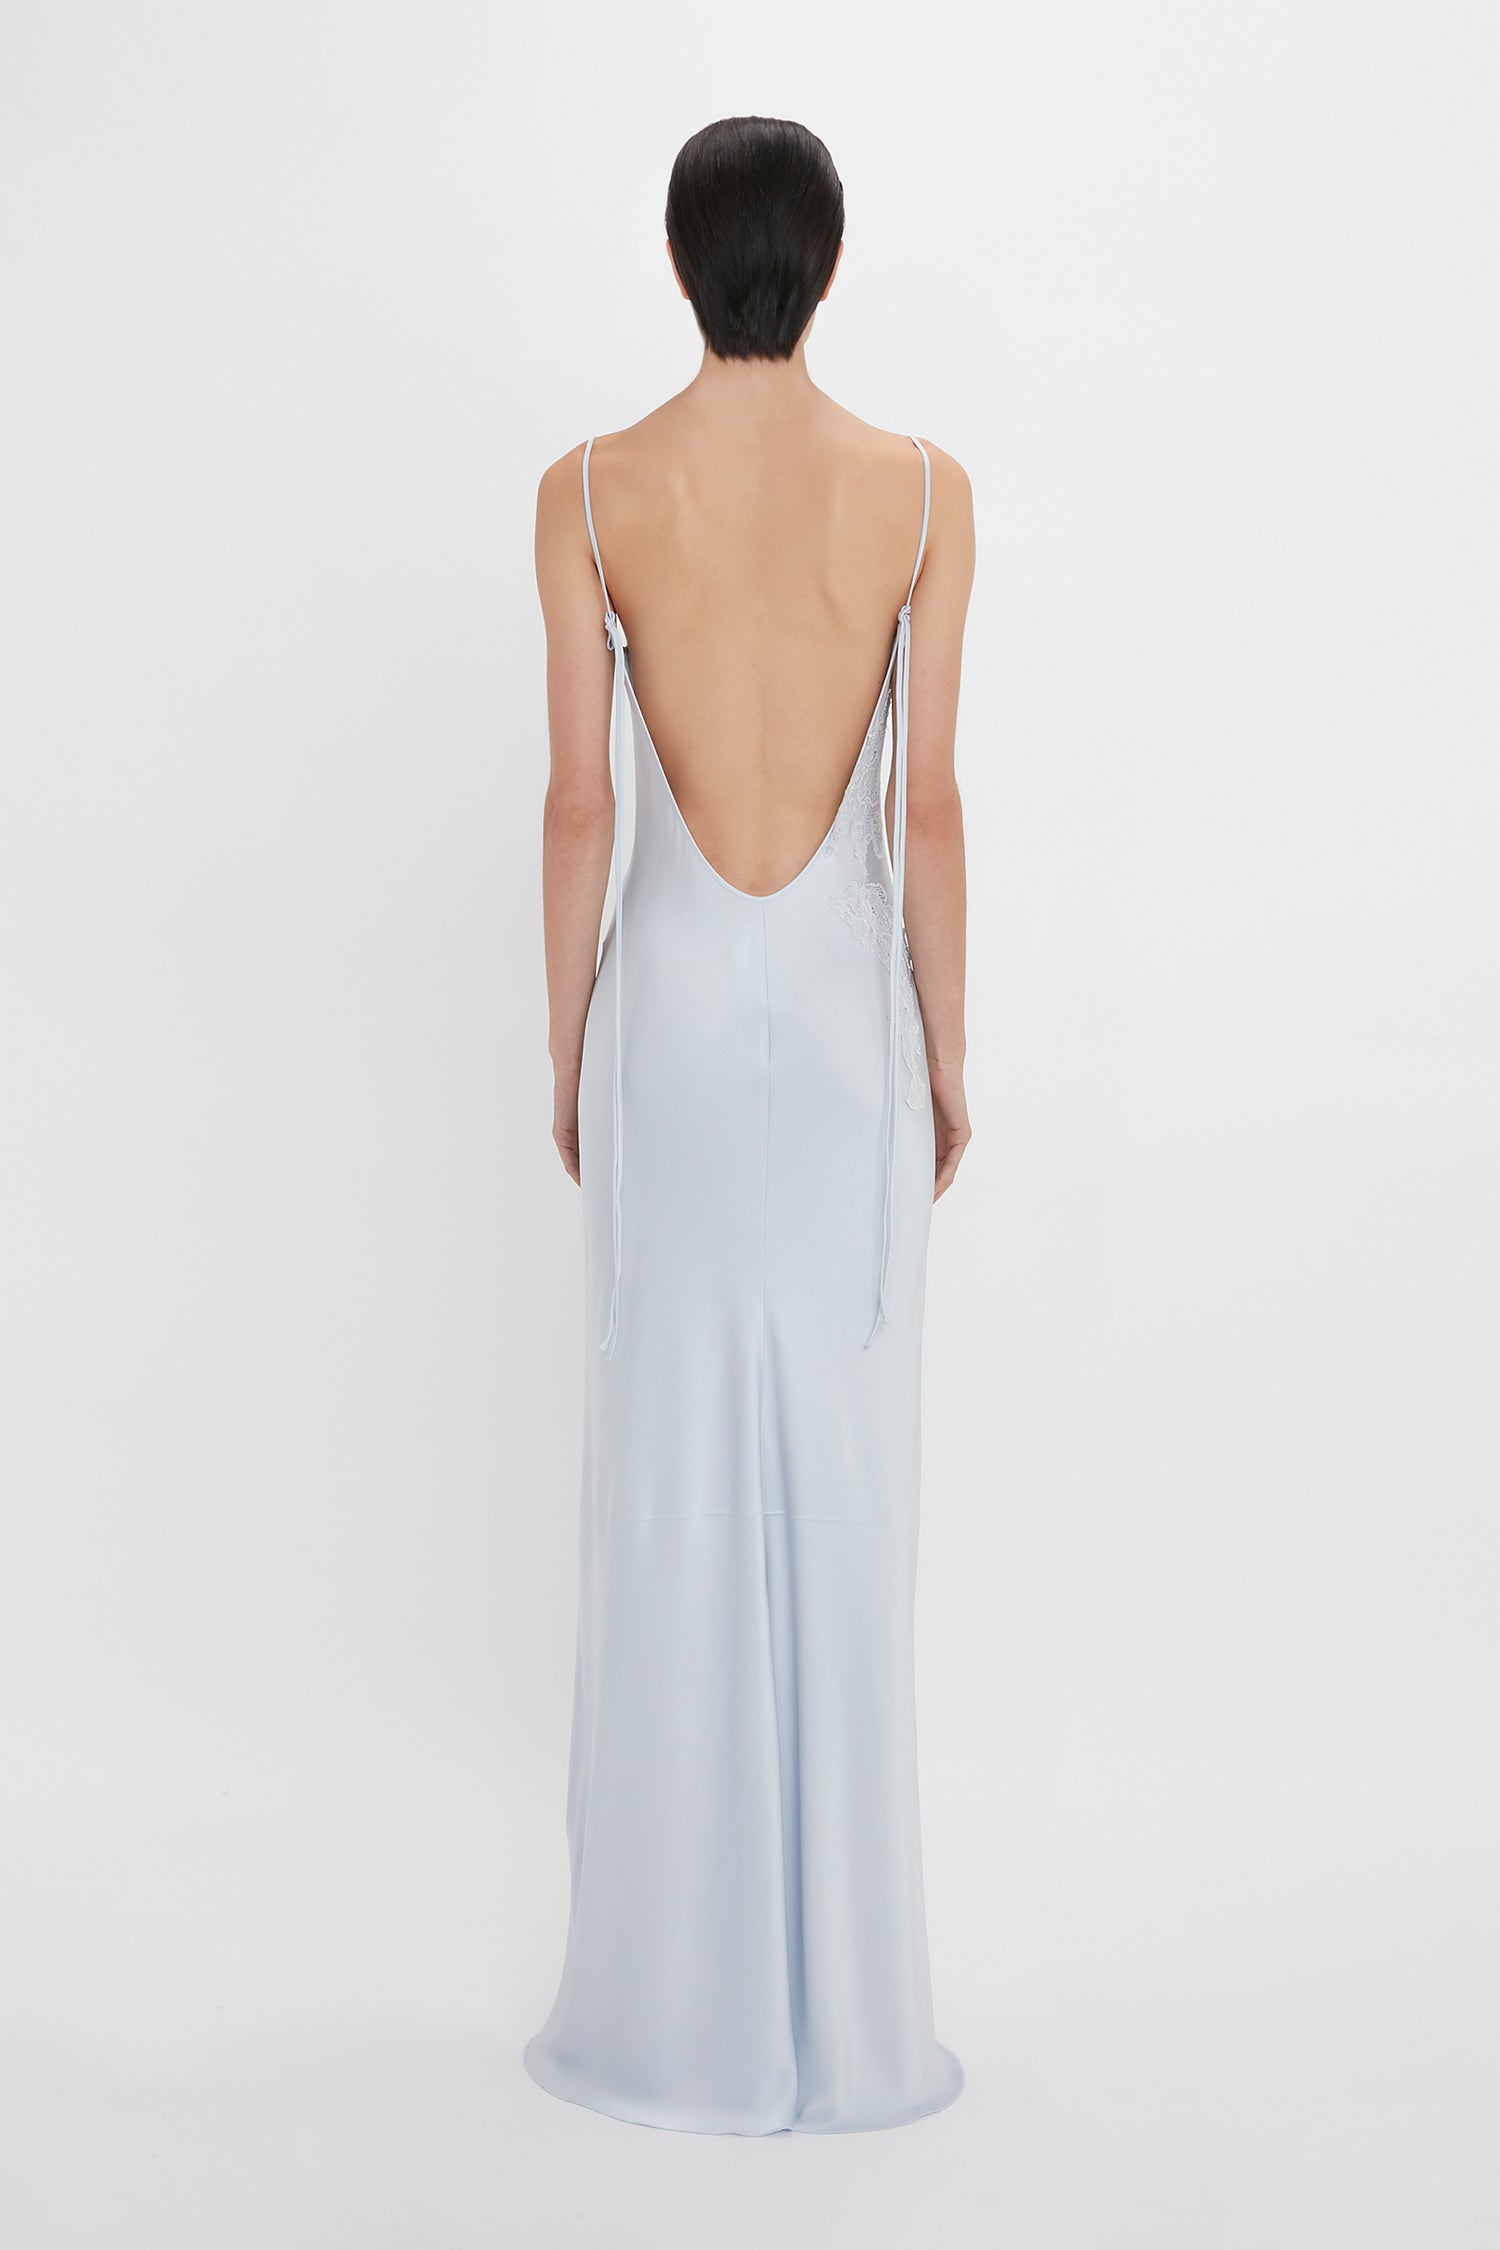 A woman with short dark hair is shown from the back, wearing a Victoria Beckham Exclusive Lace Detail Floor-Length Cami Dress In Ice with thin straps and lace detail.